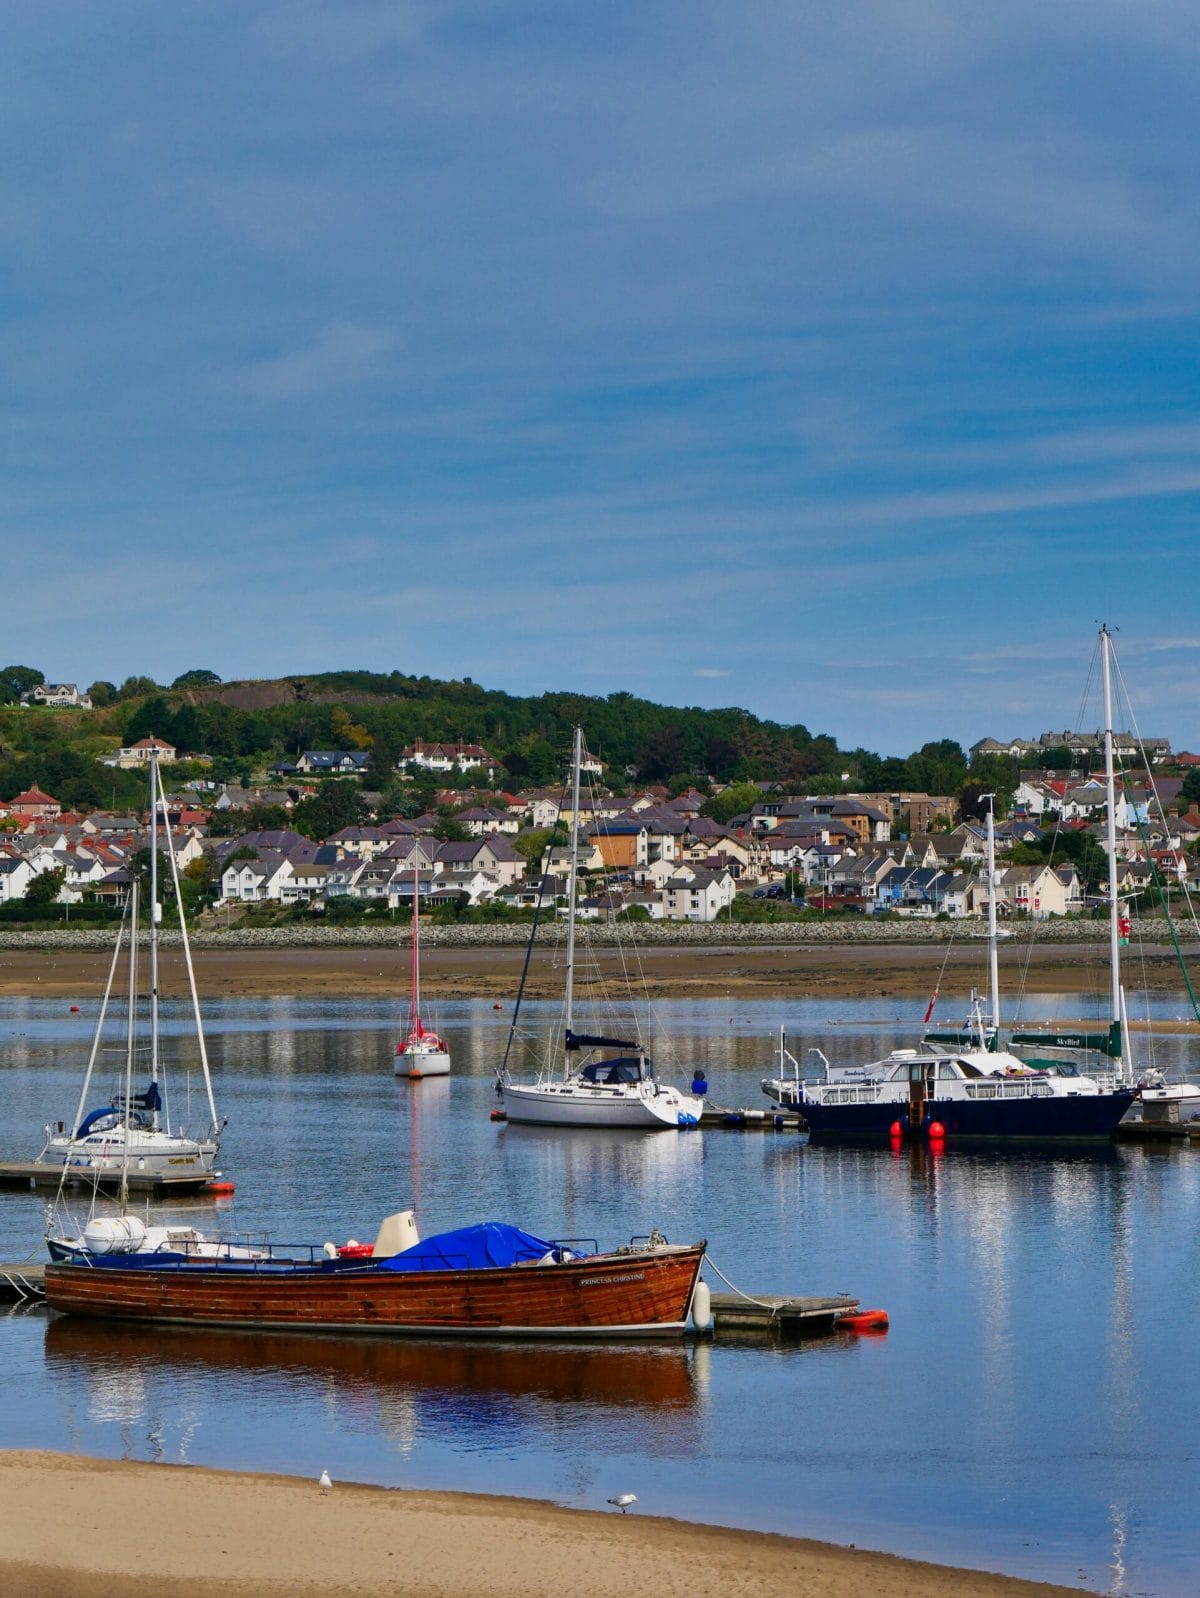 Boats in the water in Conwy, Wales